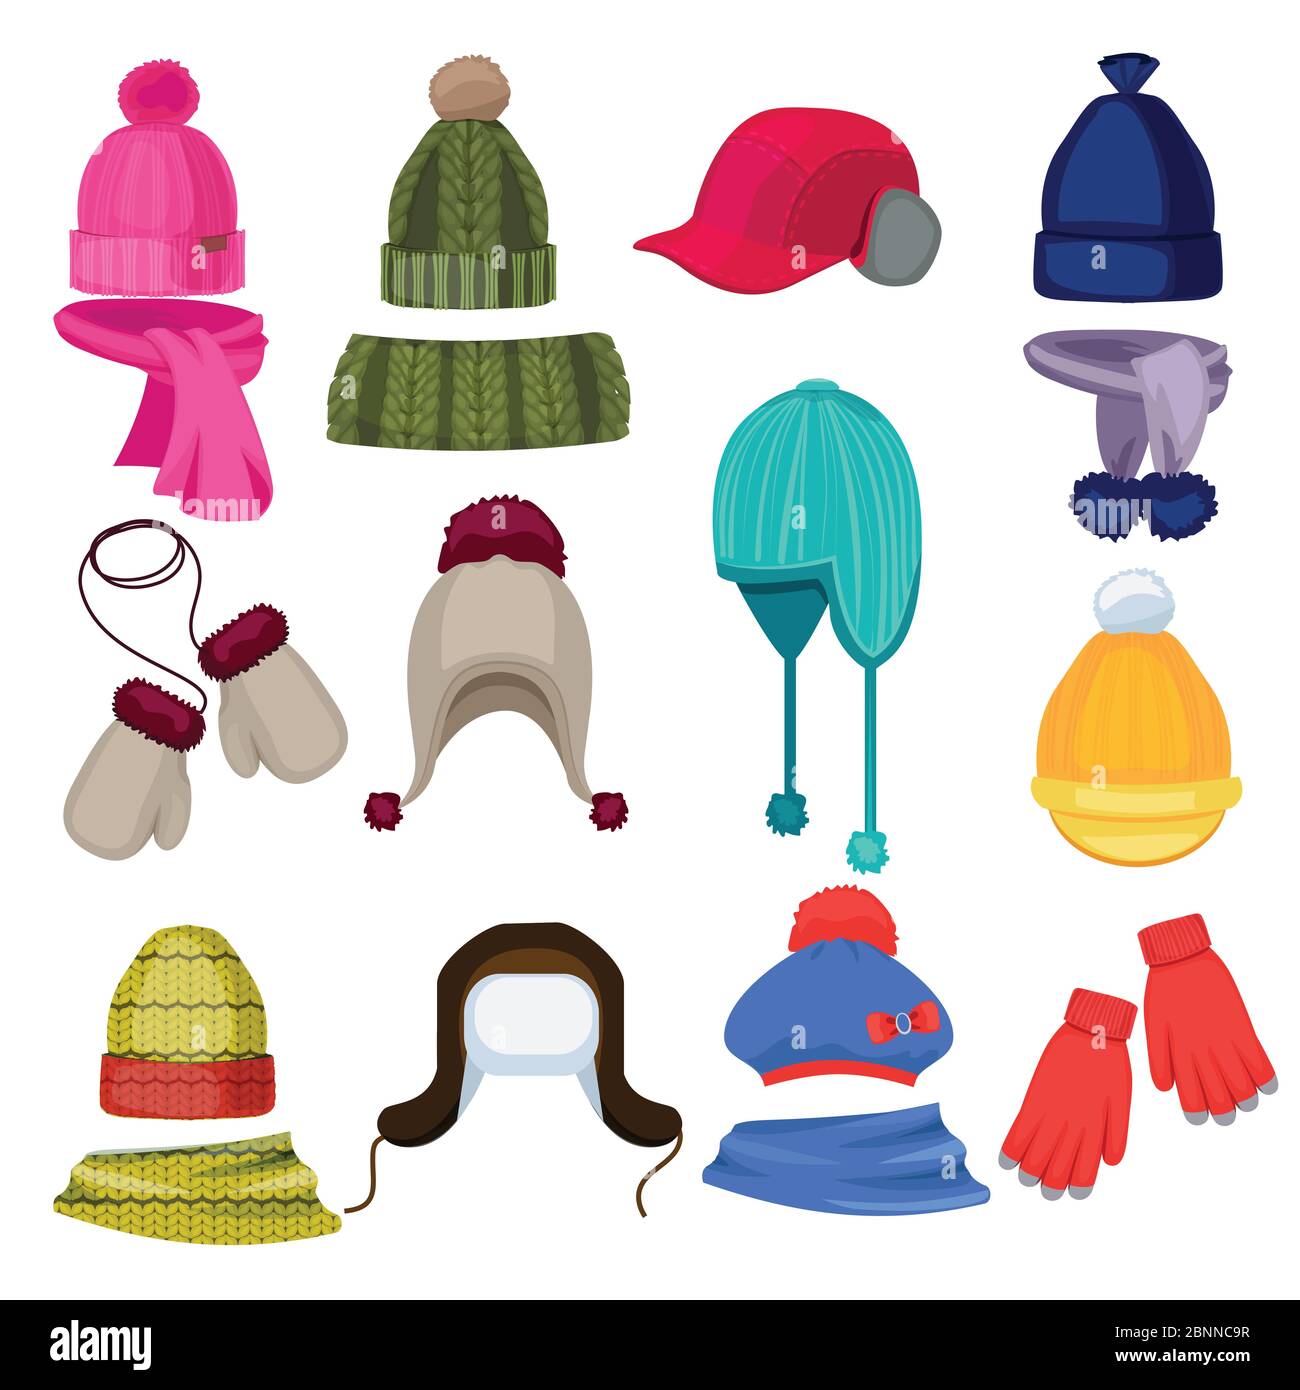 Types of Hats Cloth Accesory Stock Vector - Illustration of object